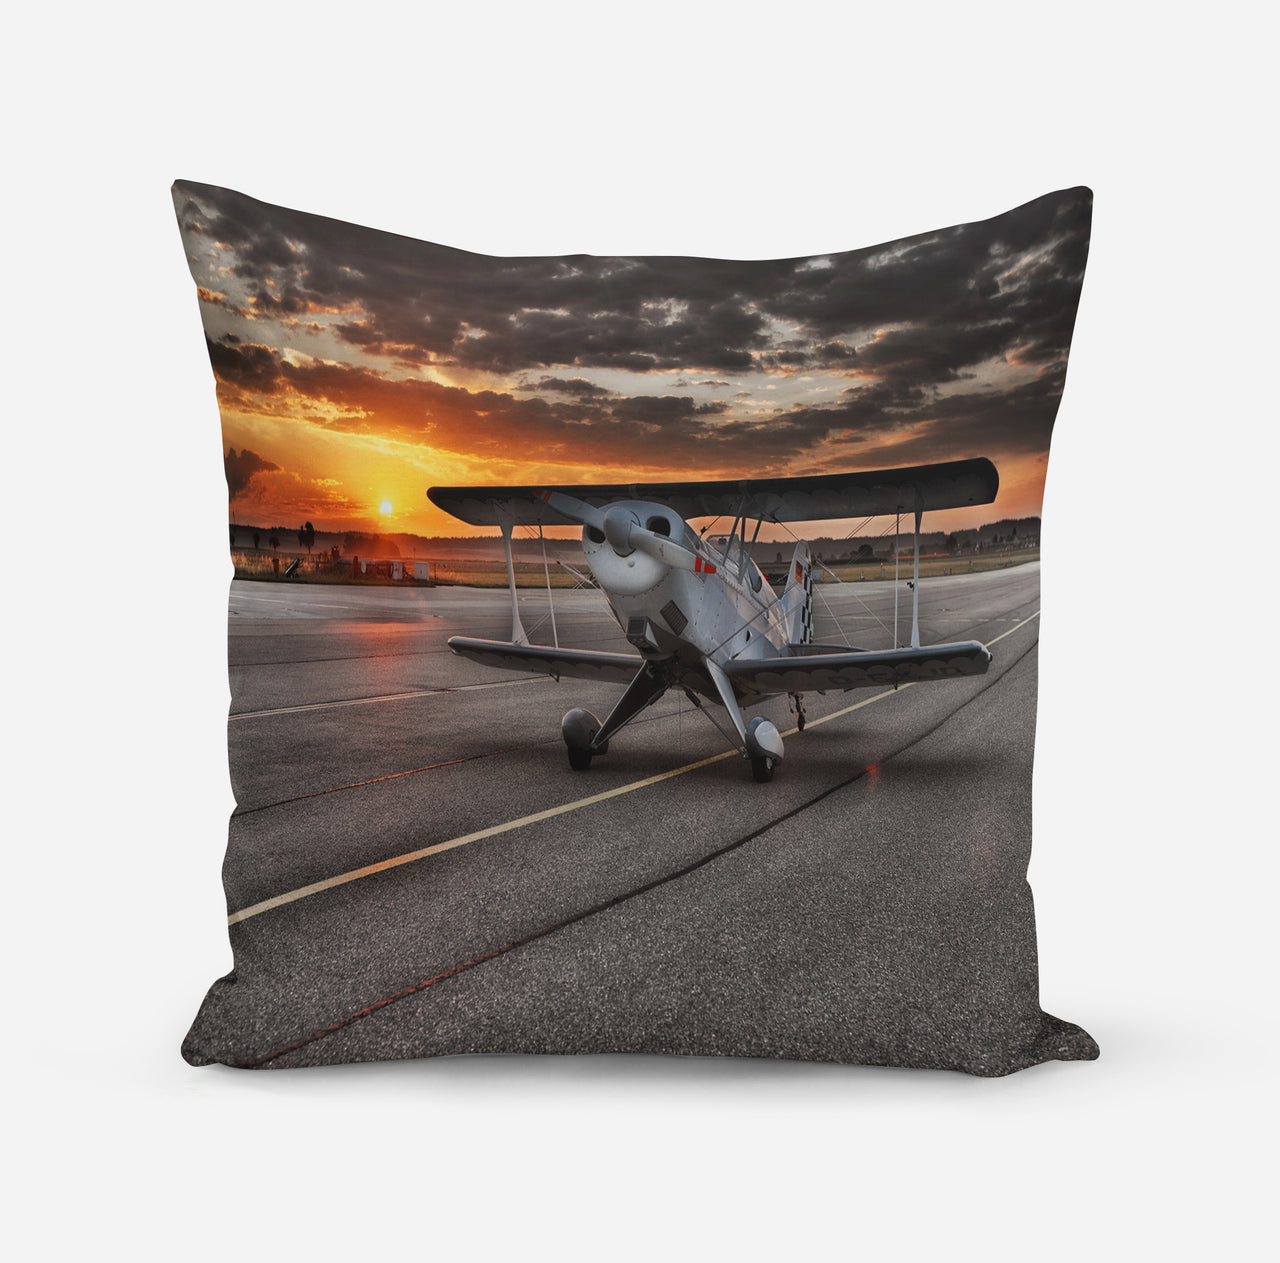 Beautiful Show Airplane Designed Pillows